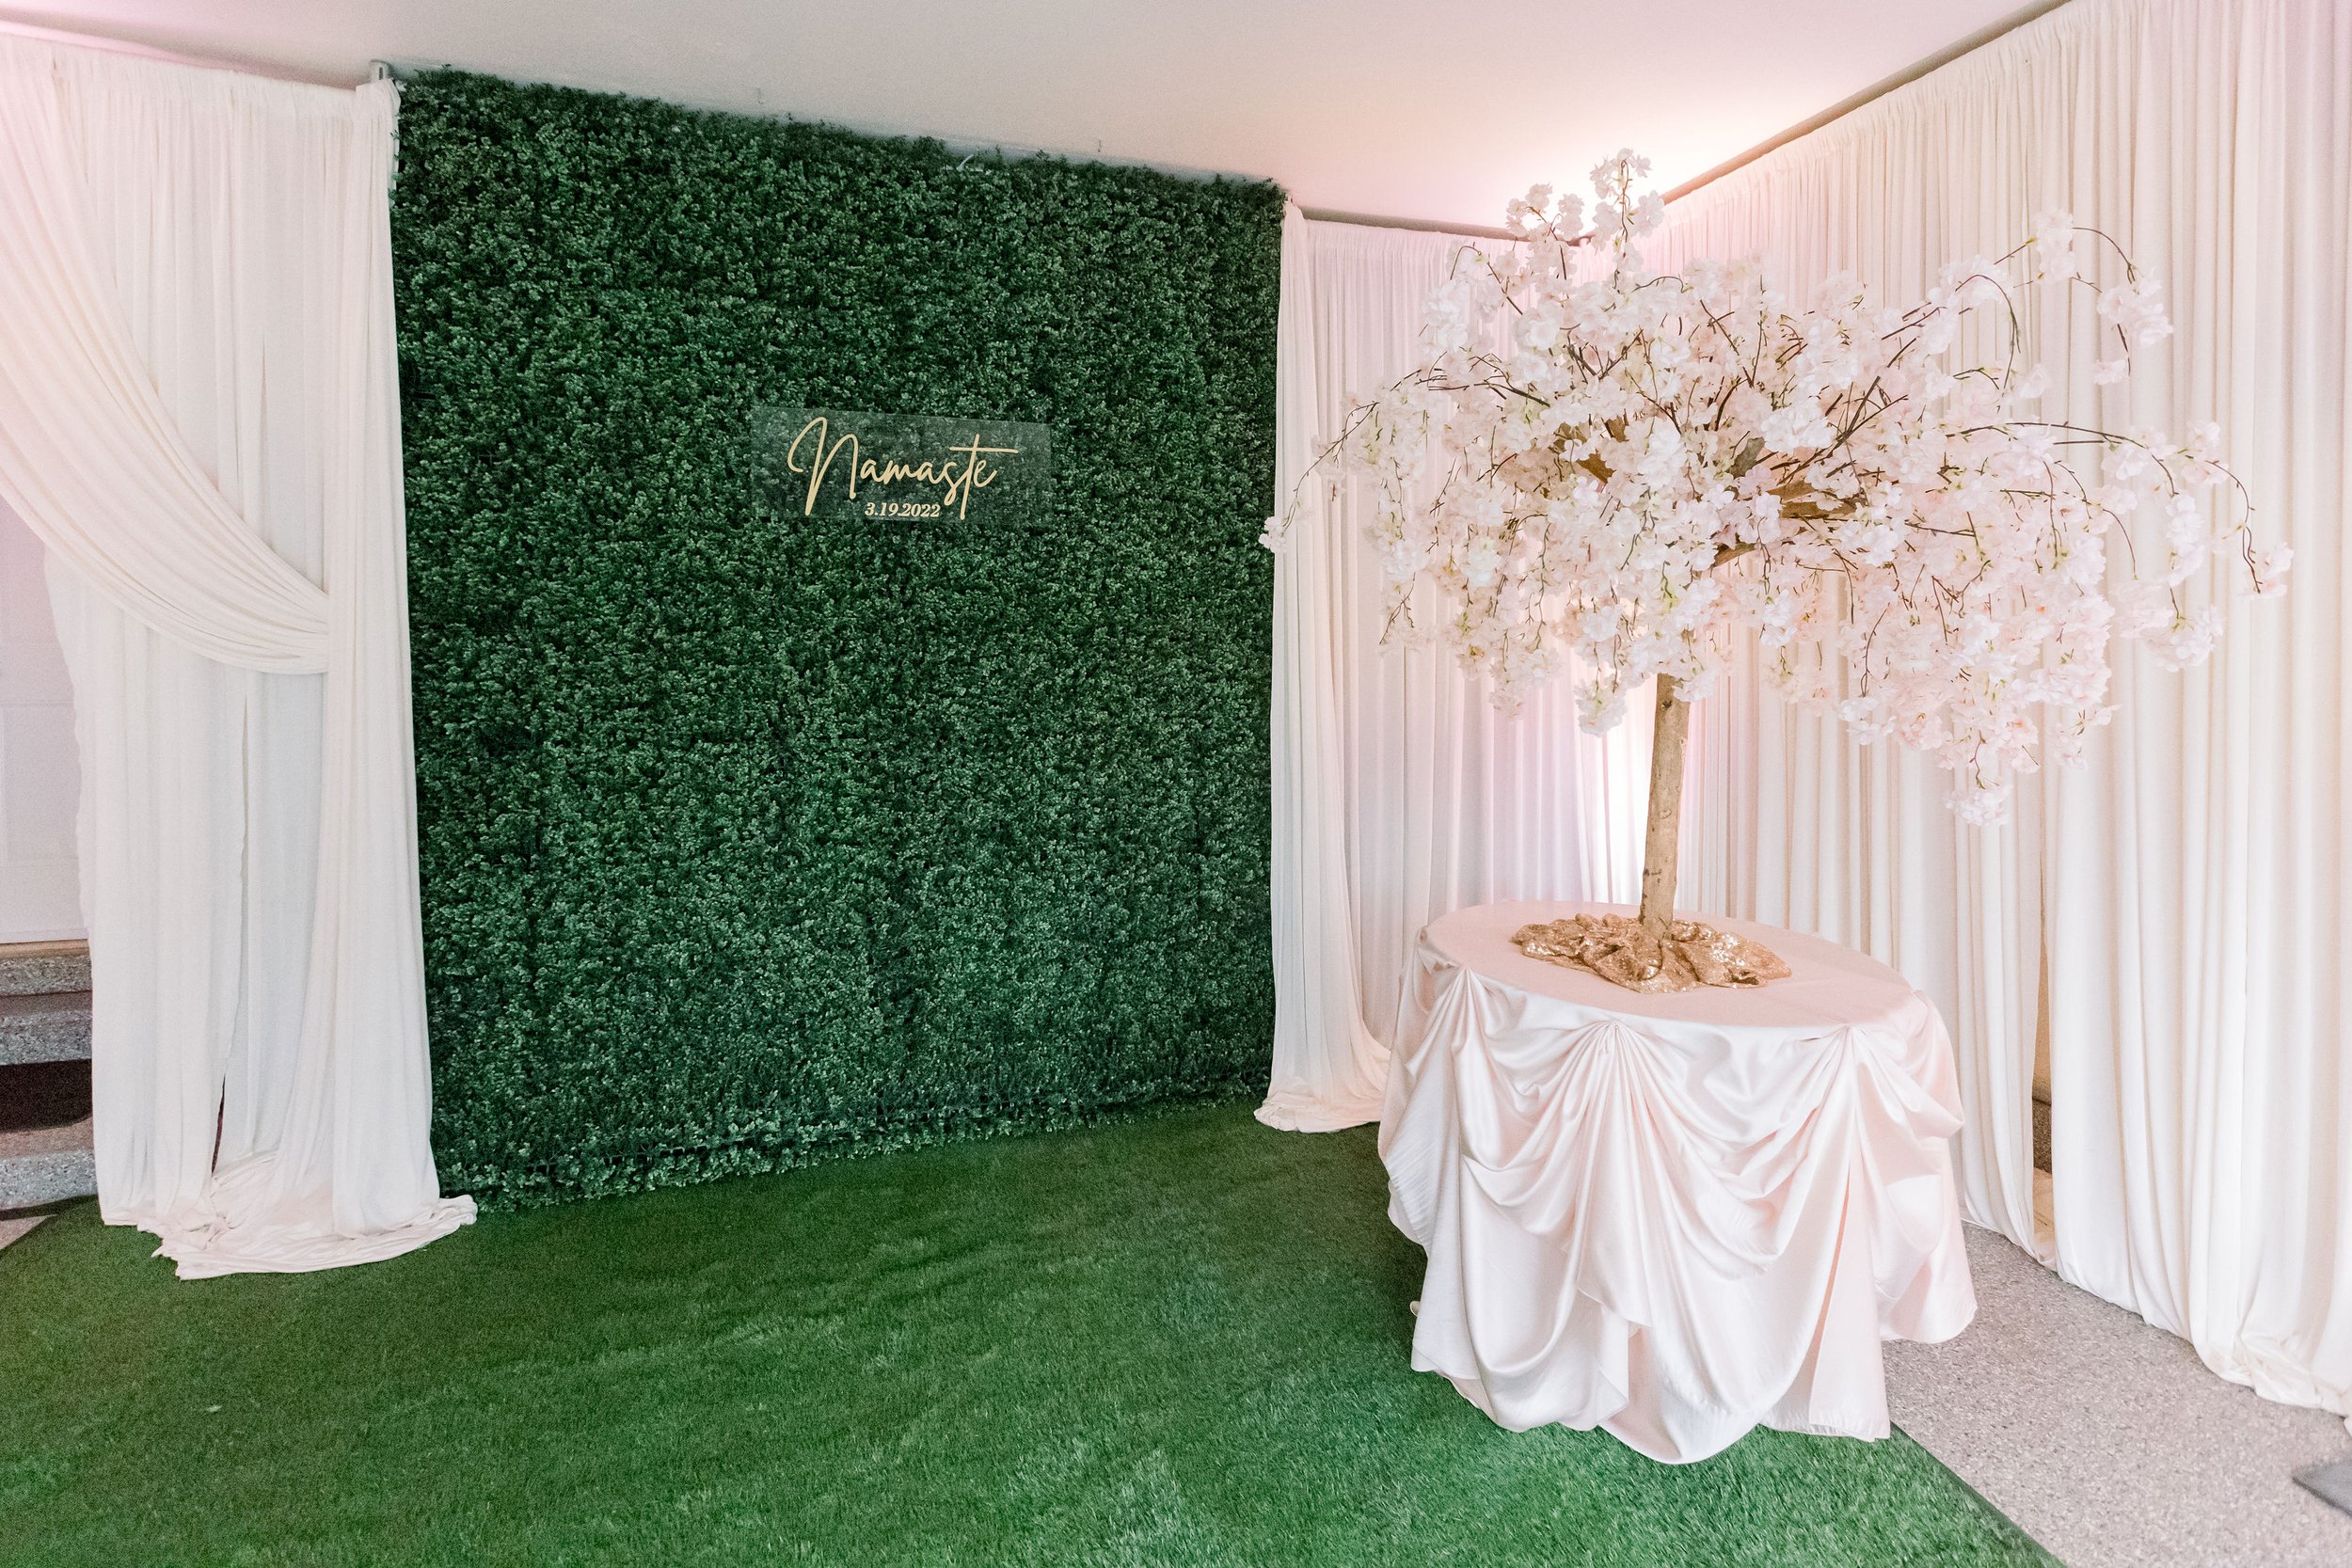 Basement wall draping wedding in the living room garage wall draping intimate wedding at home micro wedding event in chicago chiavari chairs table ren (10).jpg